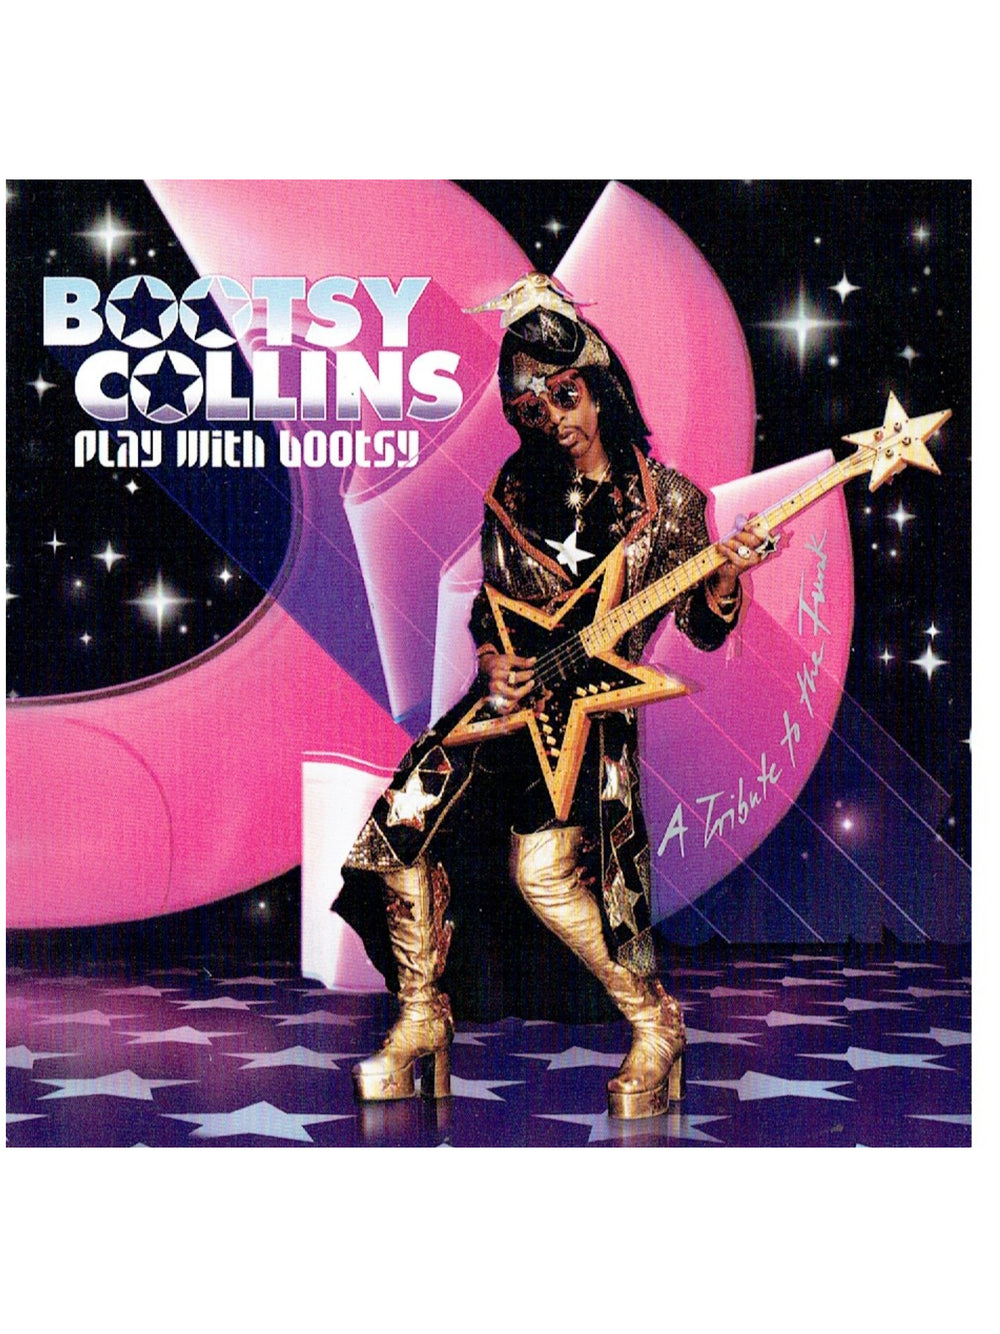 Prince – Bootsy Collins Play With Bootsy CD Album EU 2002 Release Prince